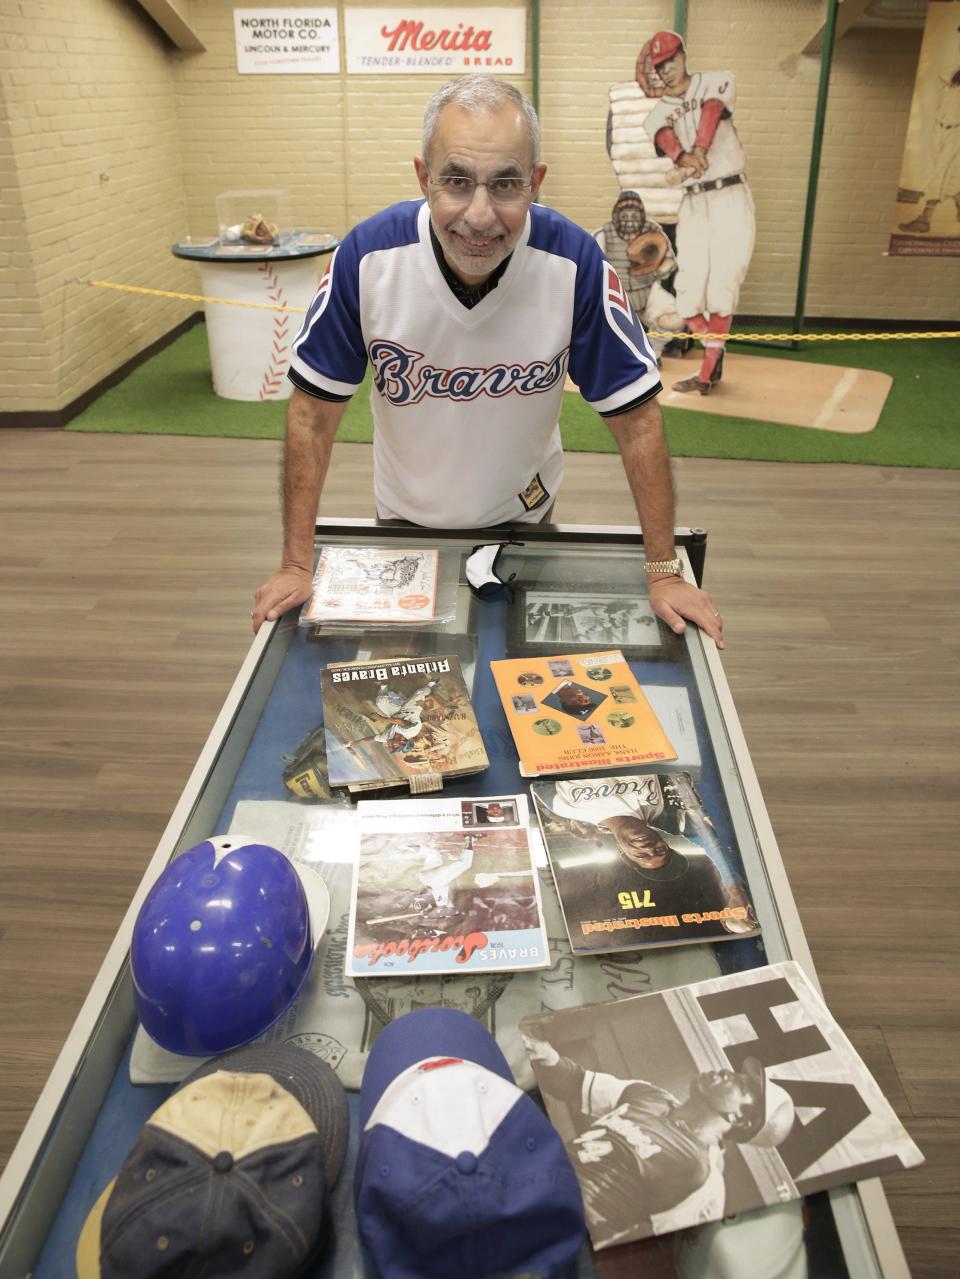 Ron Salem shows off some of his baseball memorabilia while visiting the museum at J.P. Small Memorial Stadium in the Durkeeville neighborhood in 2021. Salem, a lifelong fan of the Atlanta Braves and its Hall of Fame player Hank Aaron, successfully proposed to have the baseball field portion of the stadium named after Aaron who played a minor league season at the stadium in 1953.